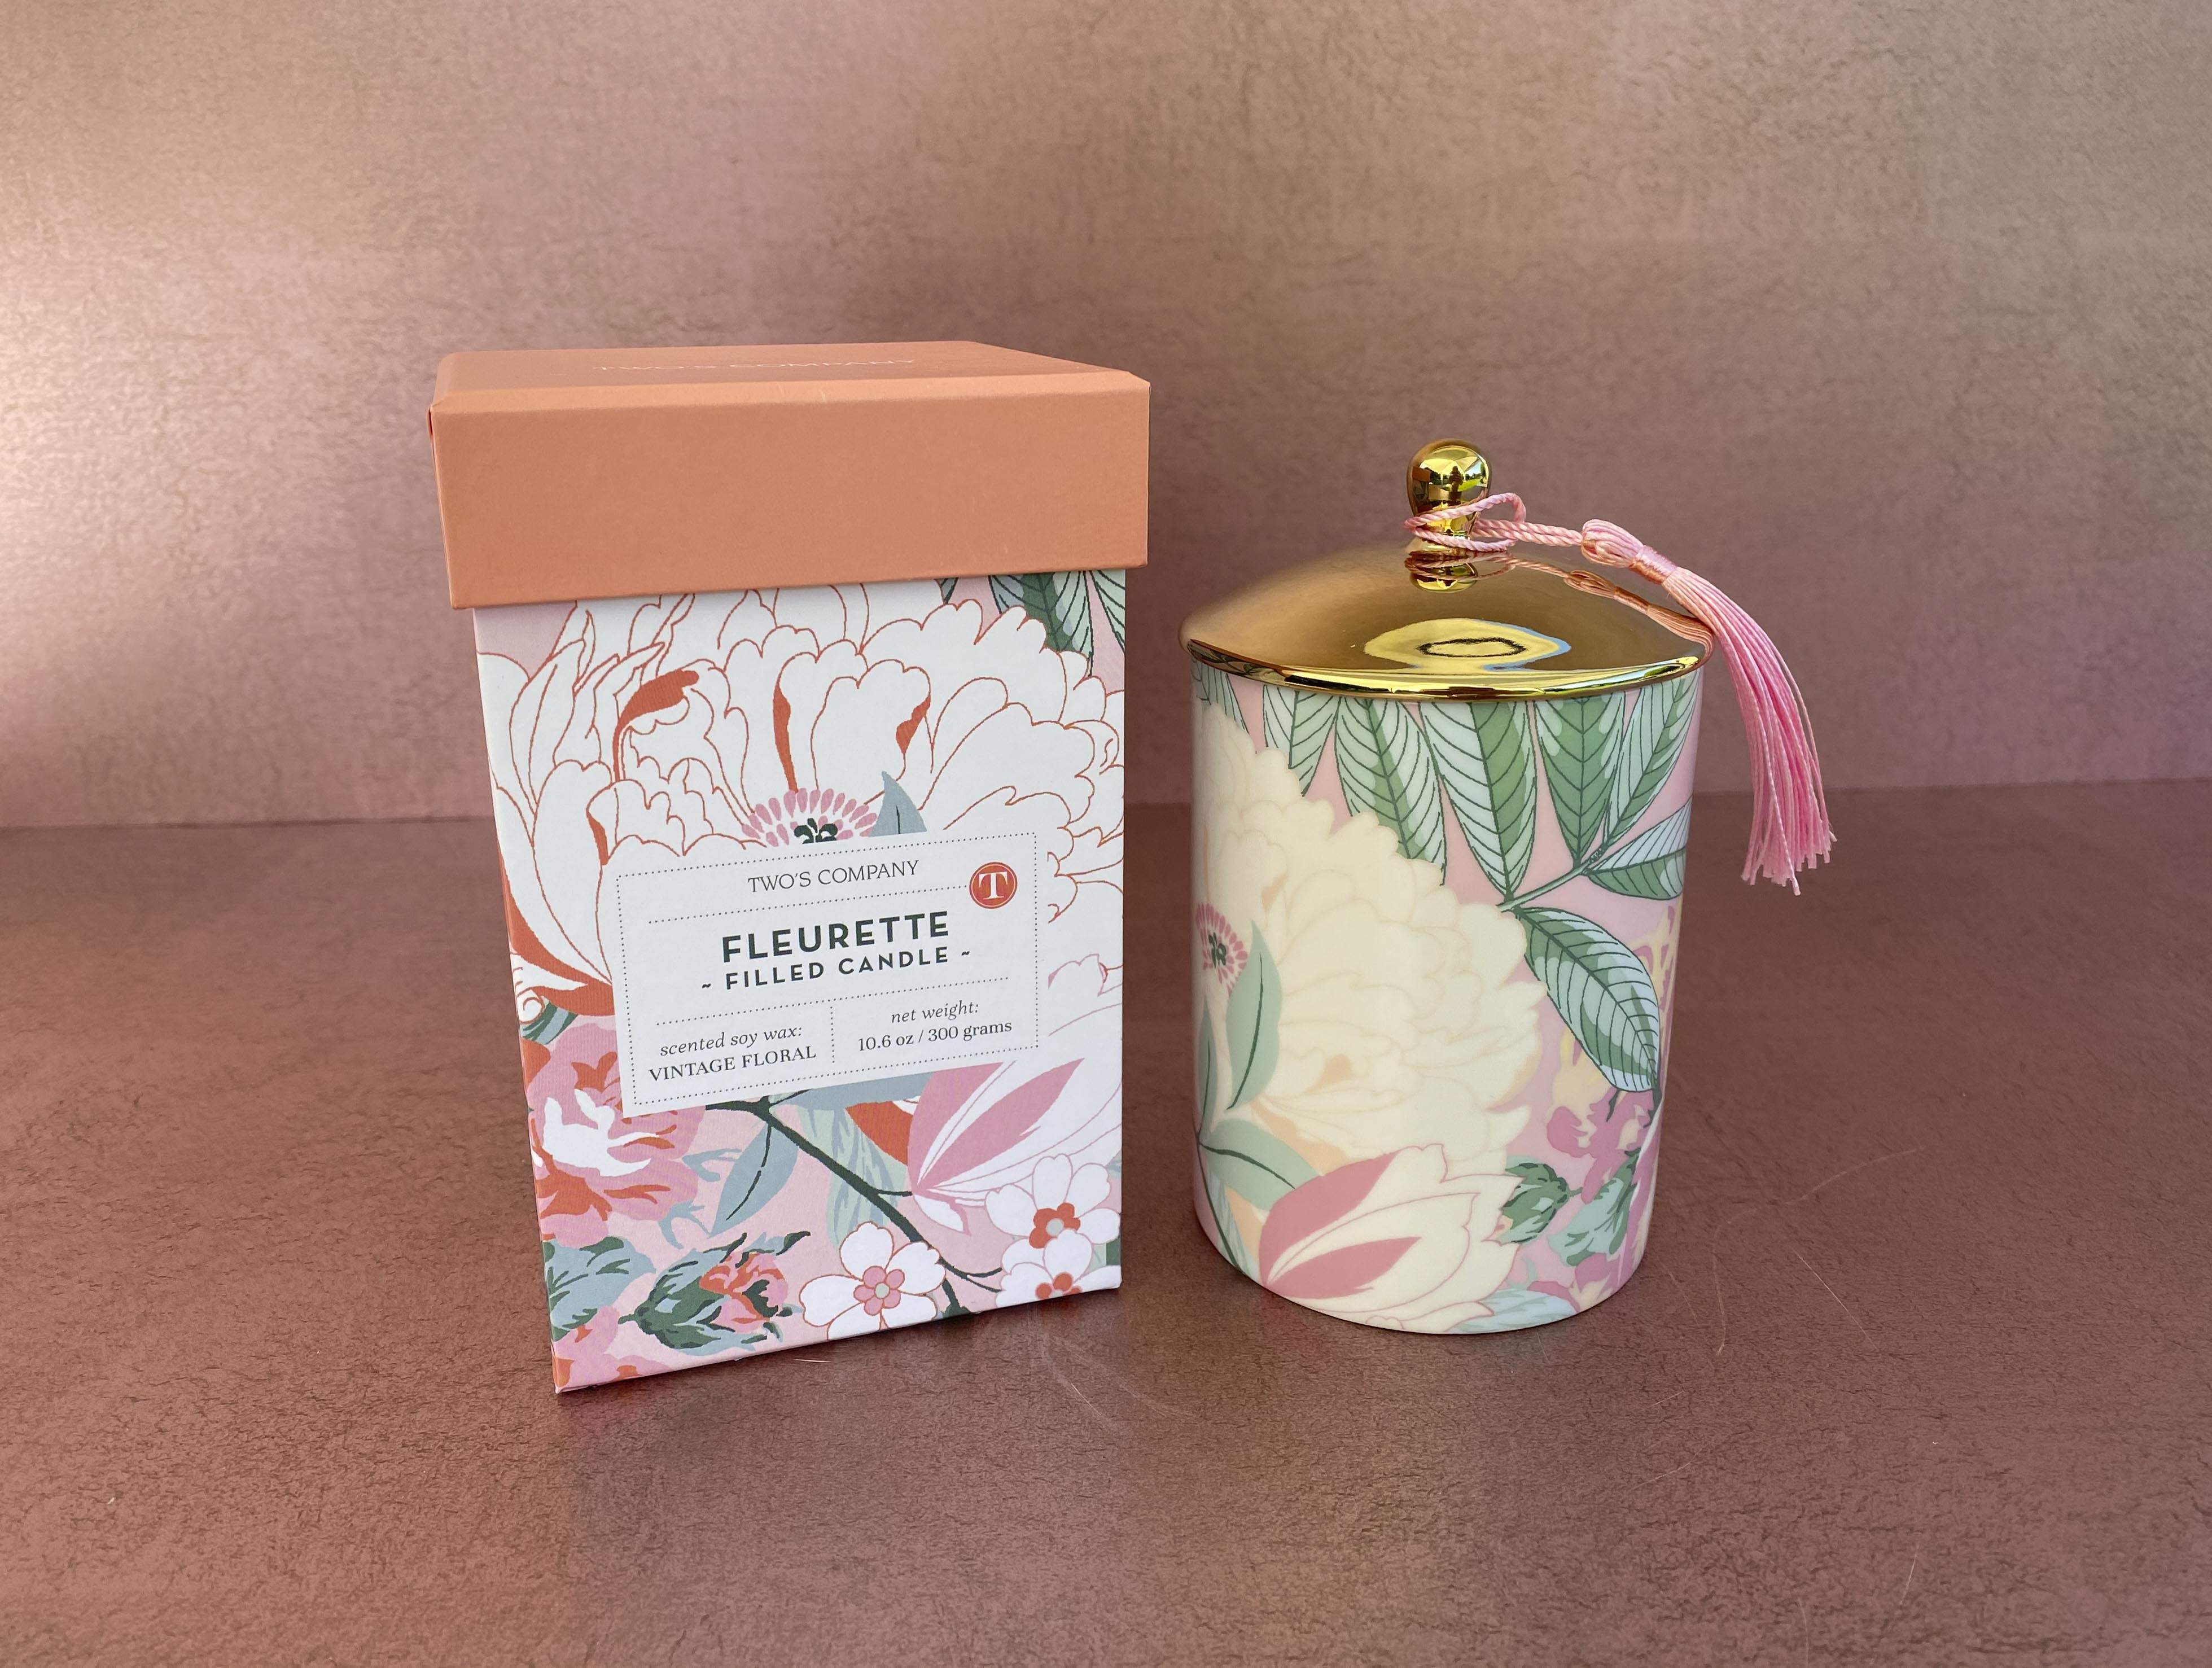 Vintage Floral Scented Candle in Gift Box